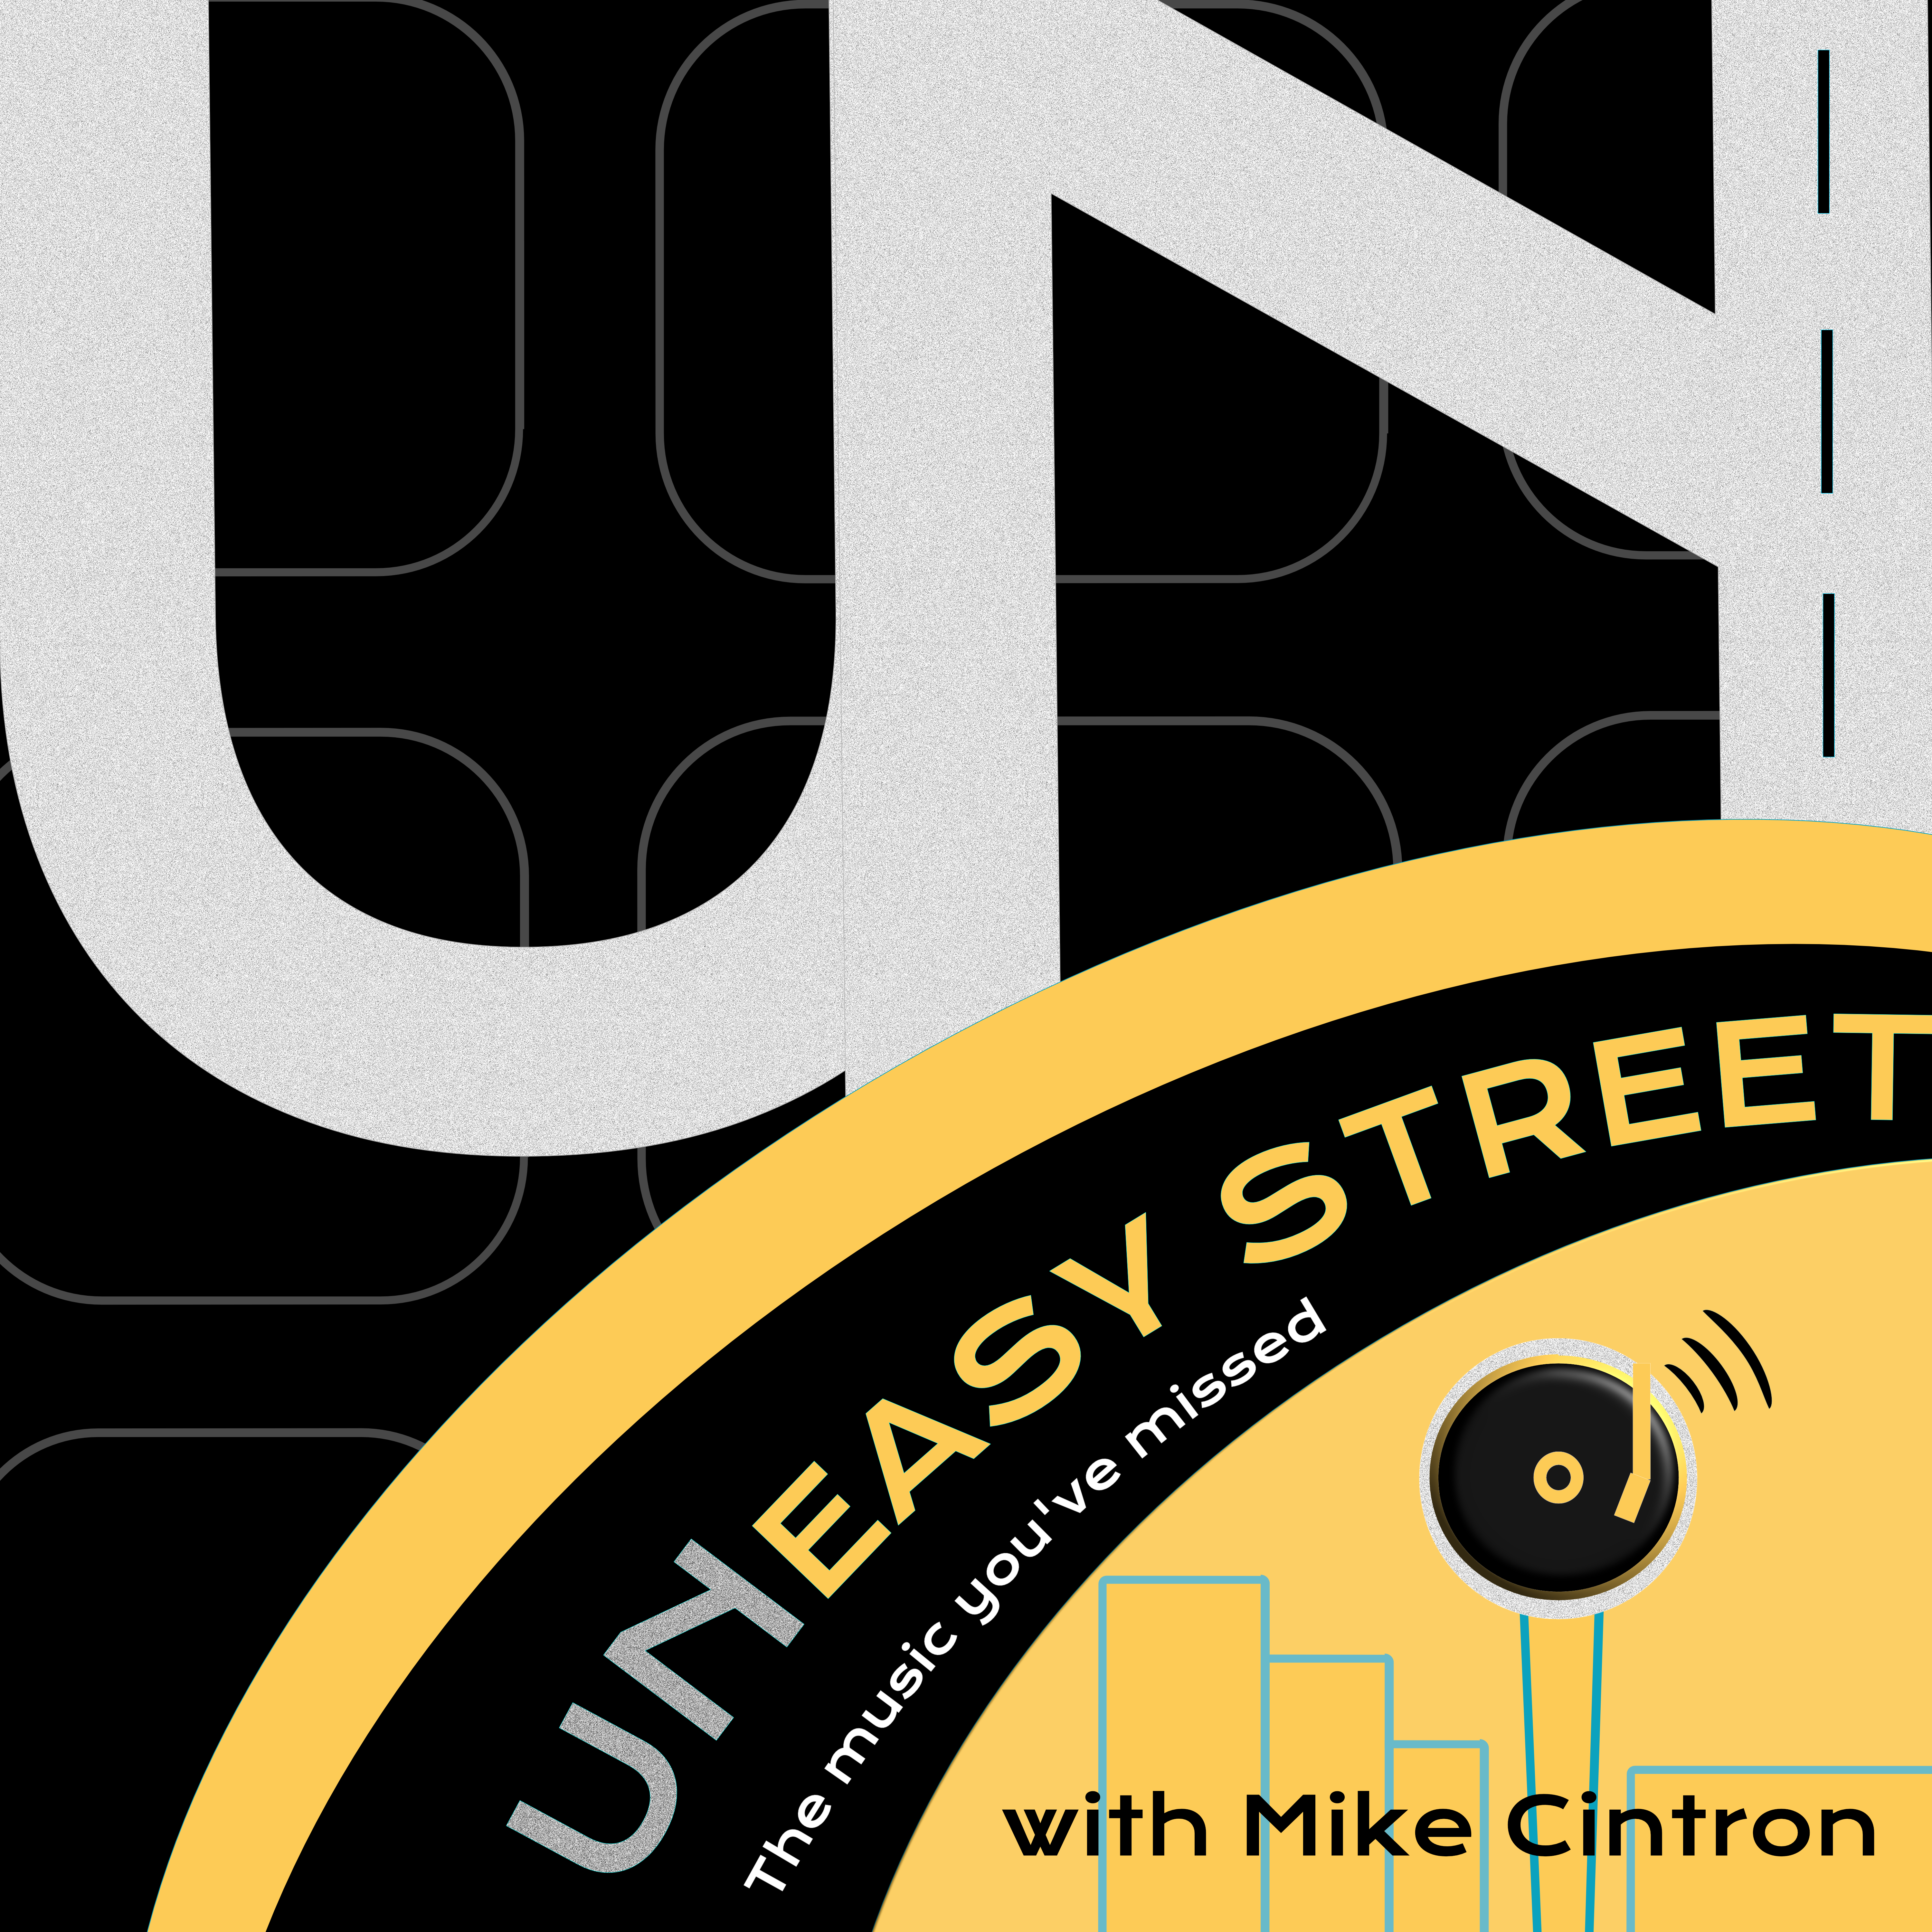 Art for UNeasy Street Radio by Mike Cintron